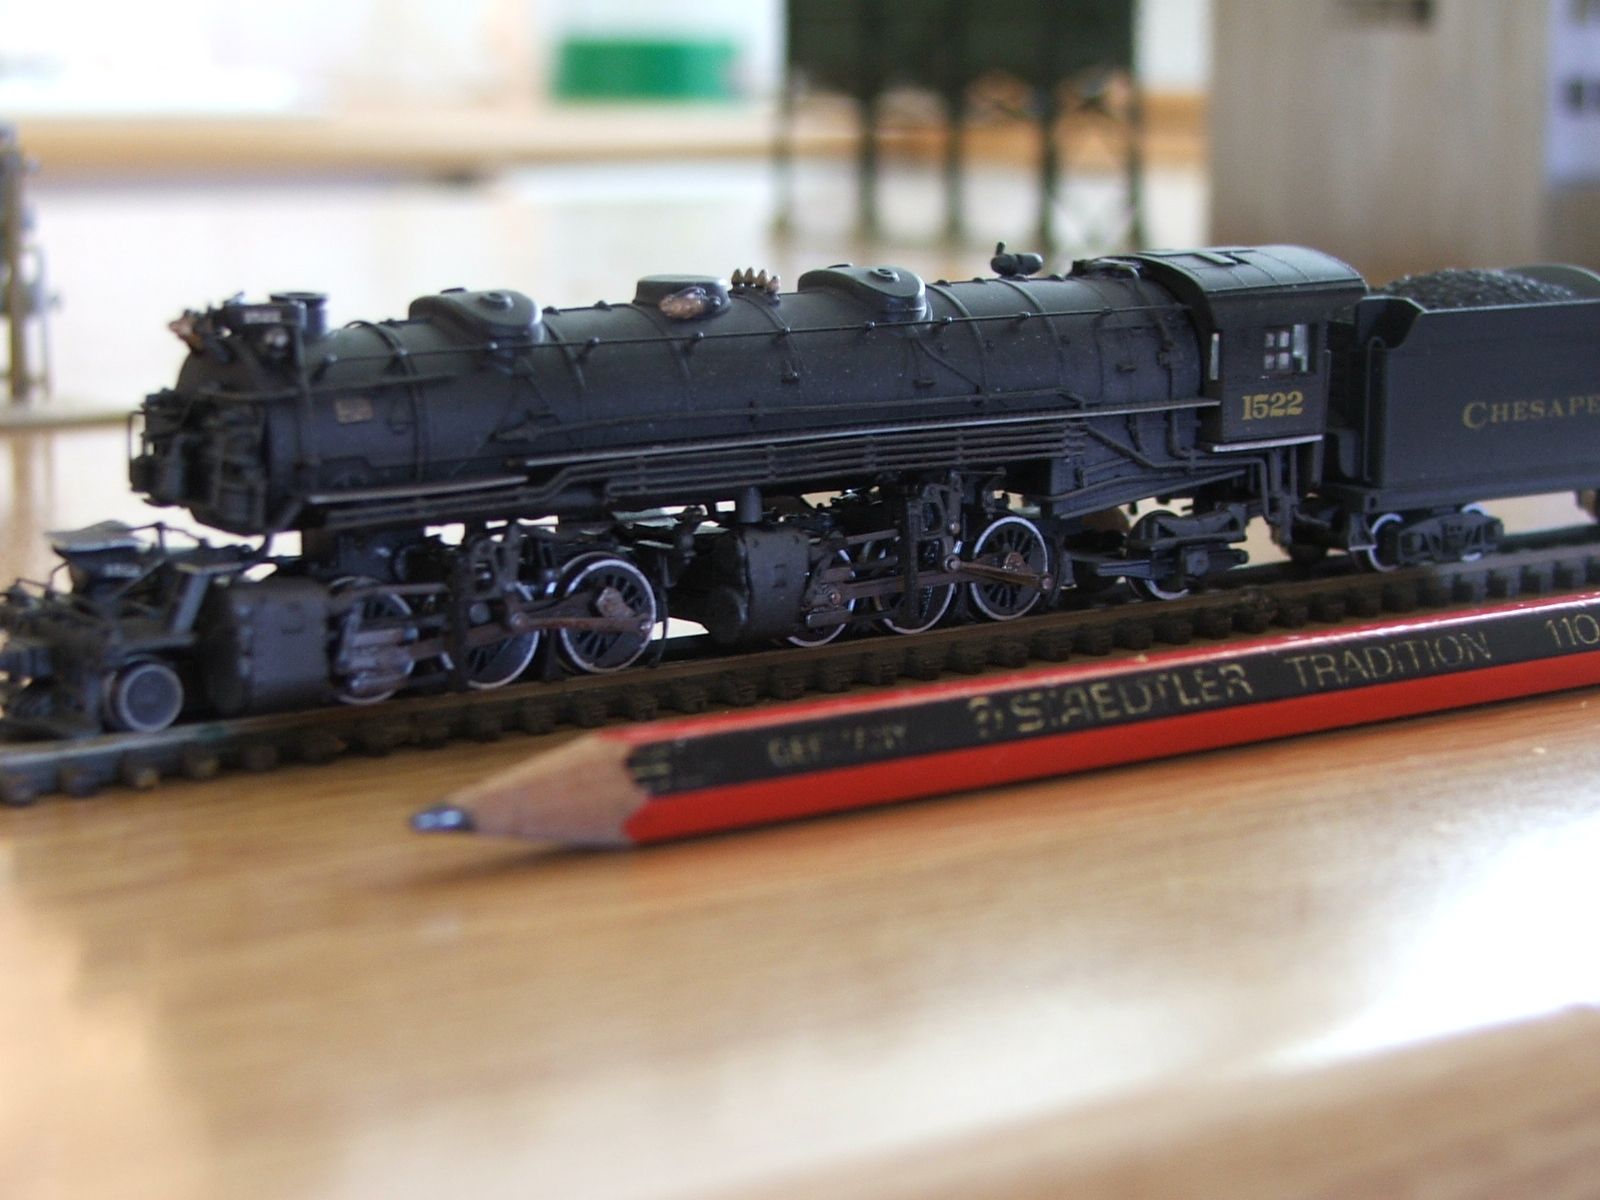  TRAINS | Tips And Creative Ideas On Building Model Train Layouts